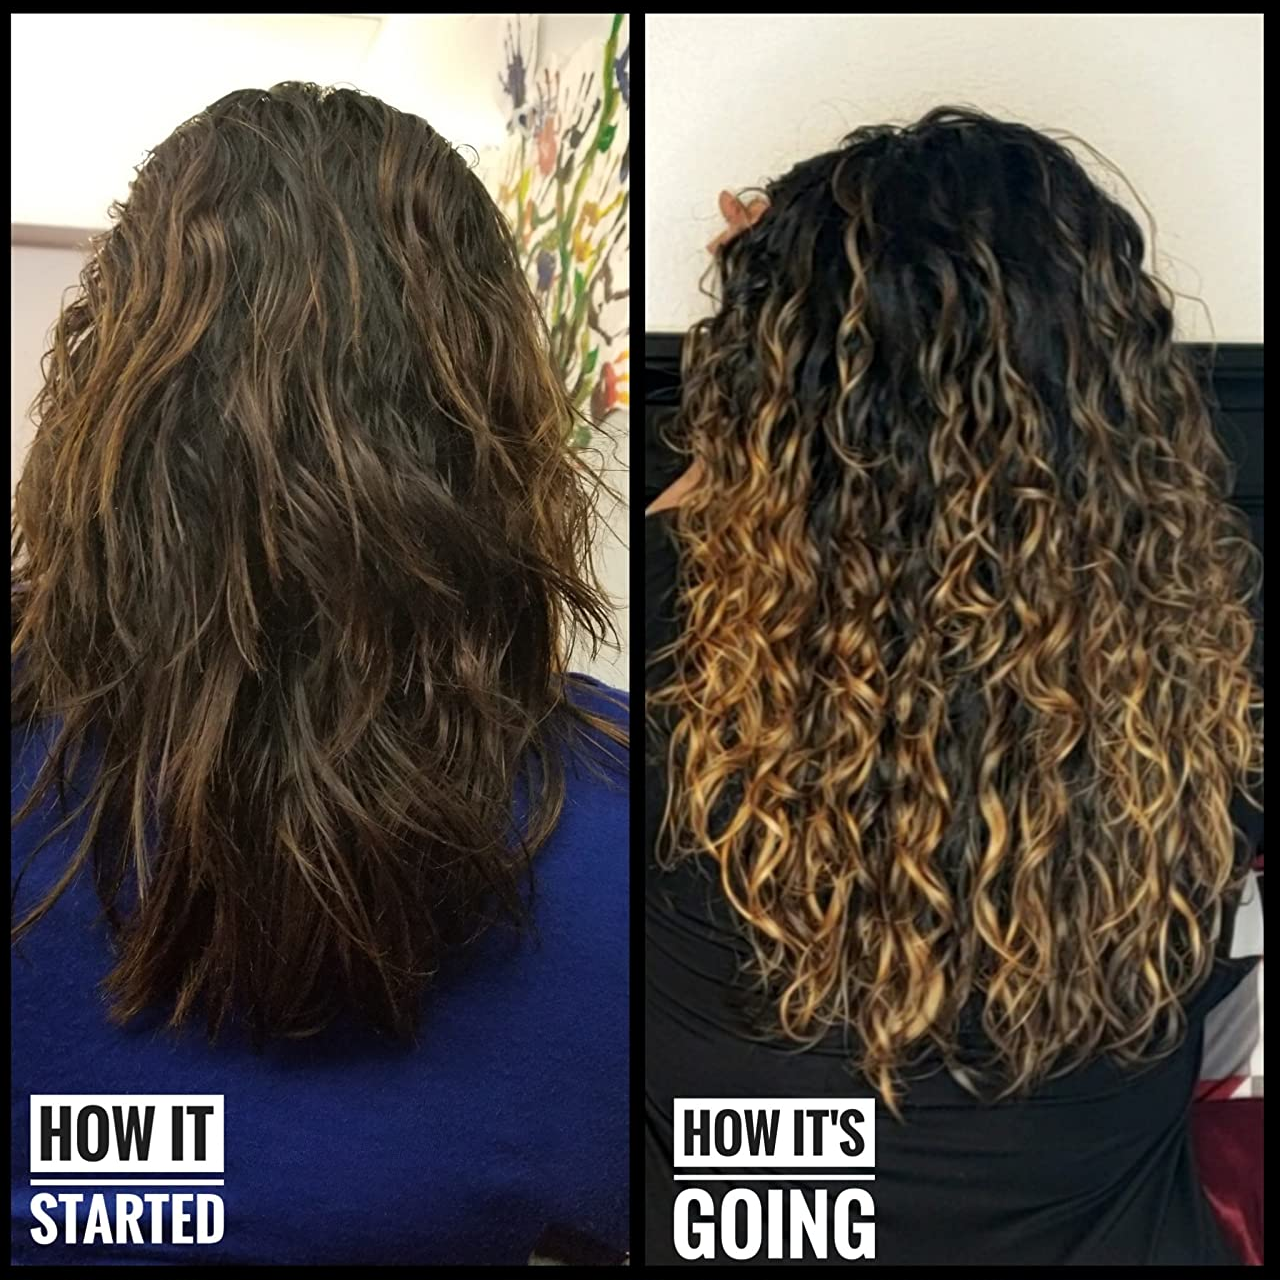 Reviewer's hair before and after using OGX curling cream